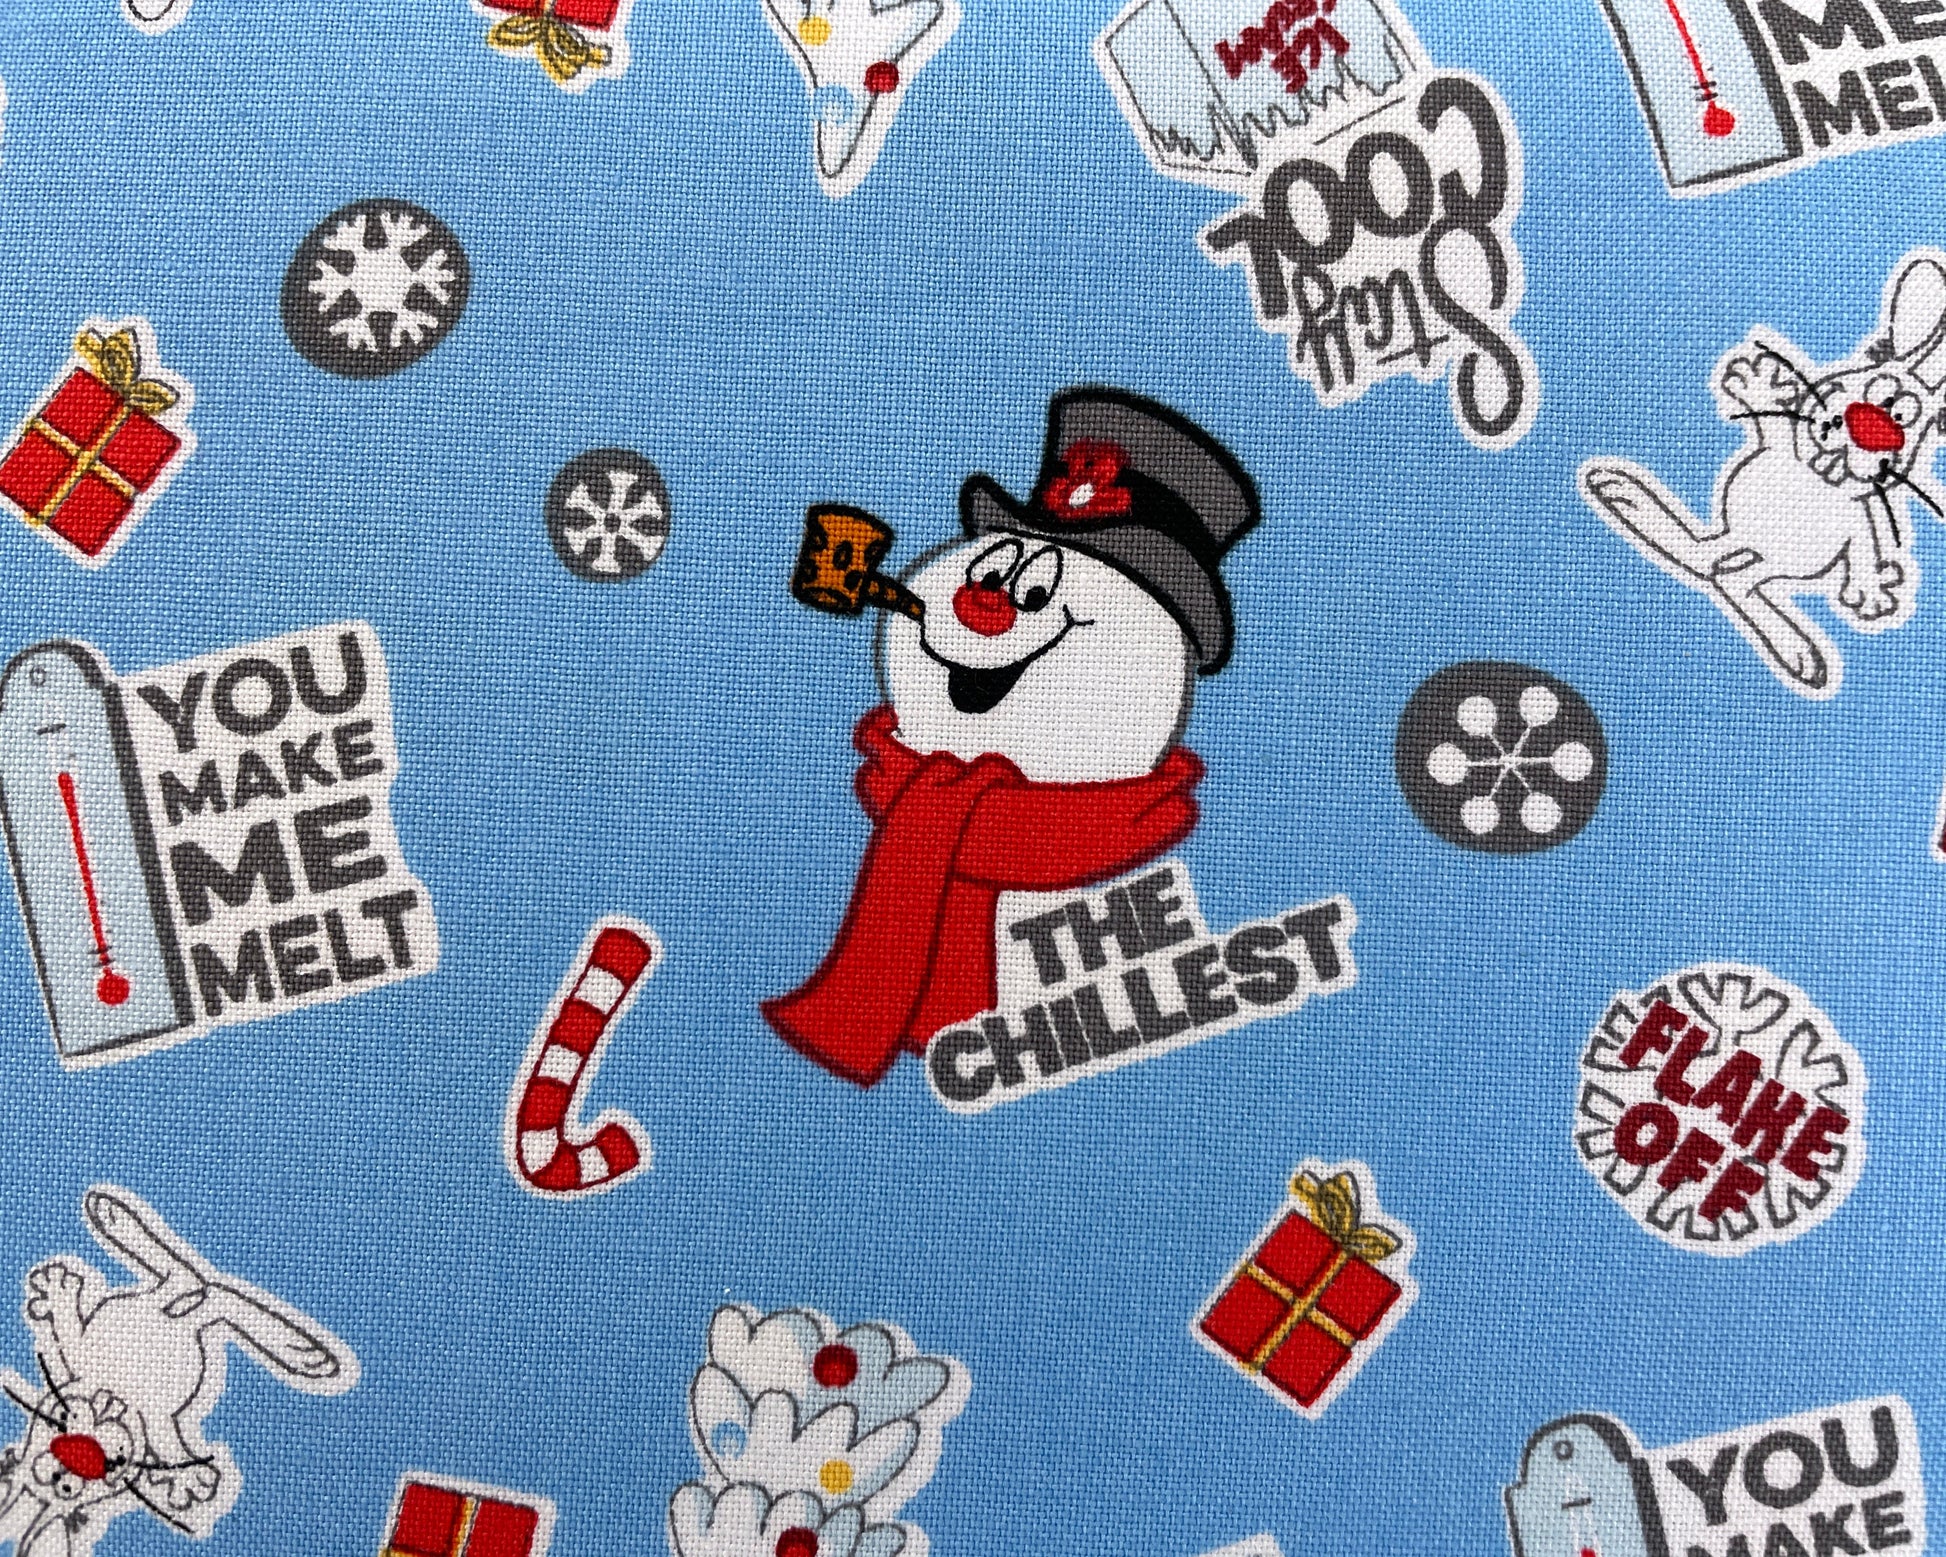 Frosty The Snowman Fabric - Frosty Asset Toss - 100% cotton fabric by Camelot - Winter theme Christmas material kids cartoon -SHIPS NEXT DAY